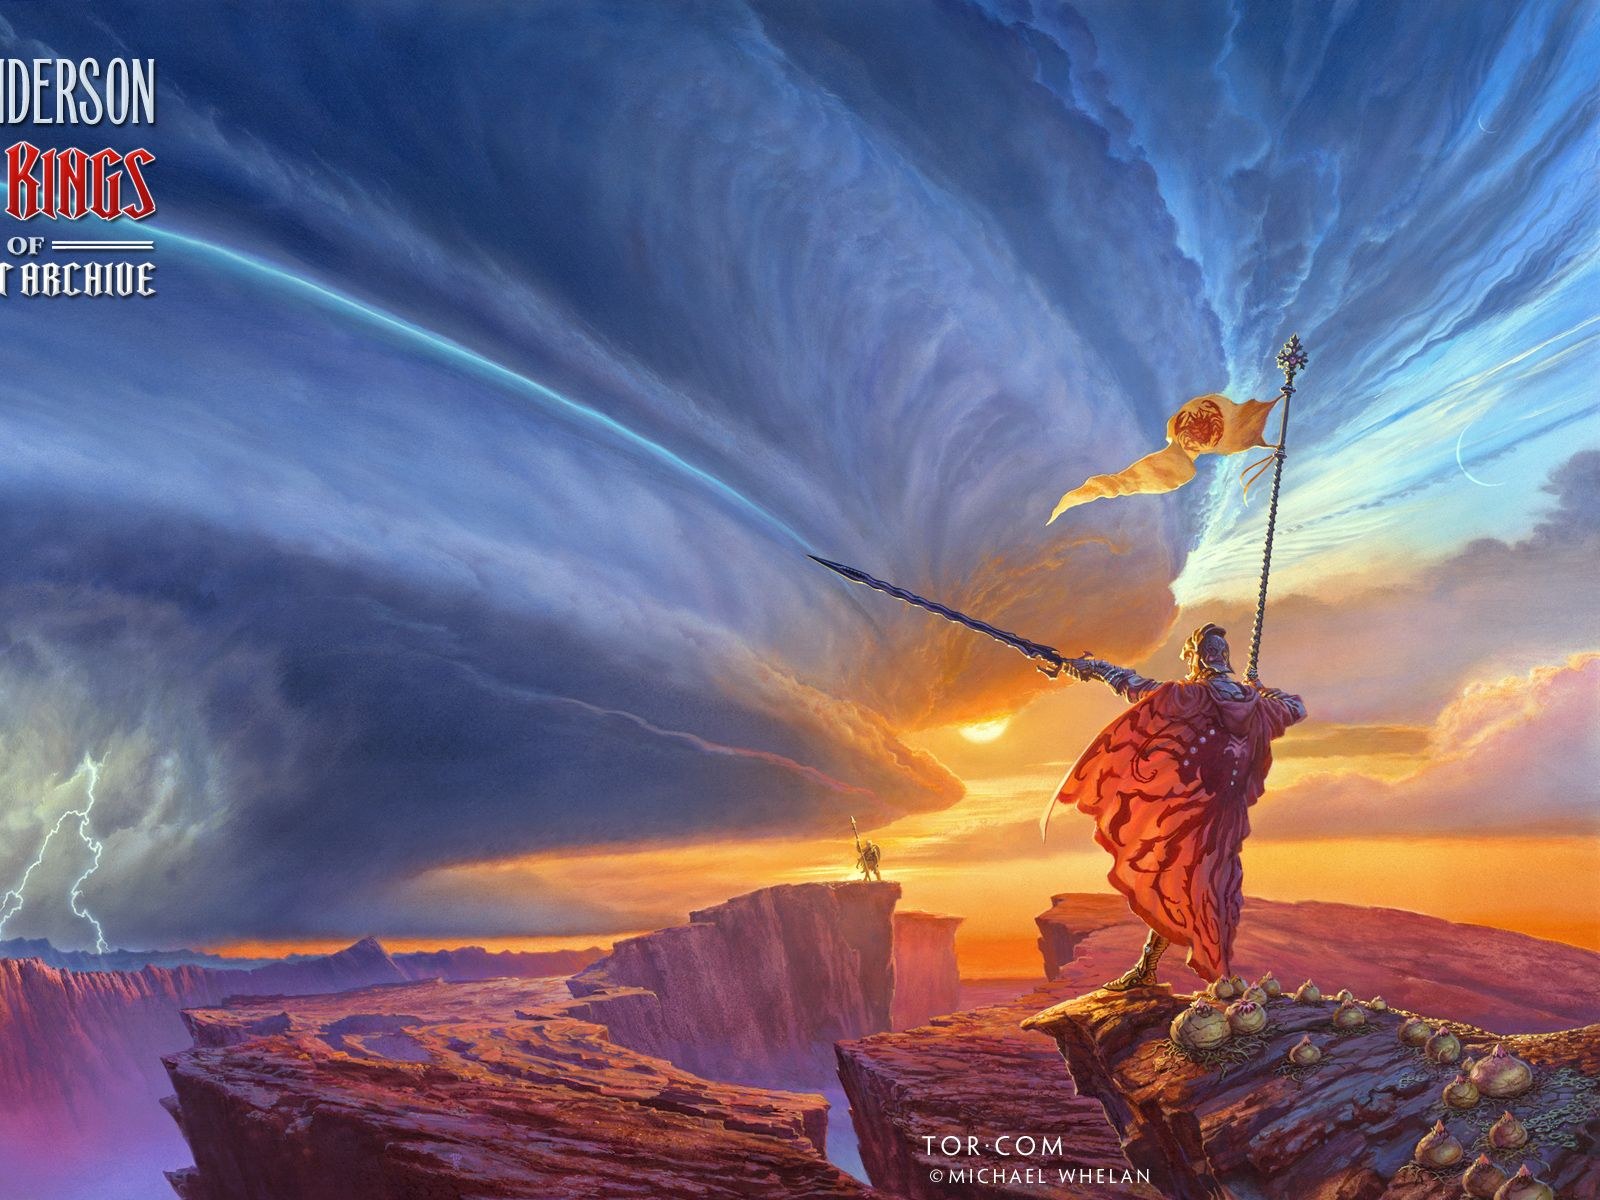 Stormlight Archive' Book 4 Release Date And Movie: Everything We Expect  From Brandon Sanderson Fantasy Series